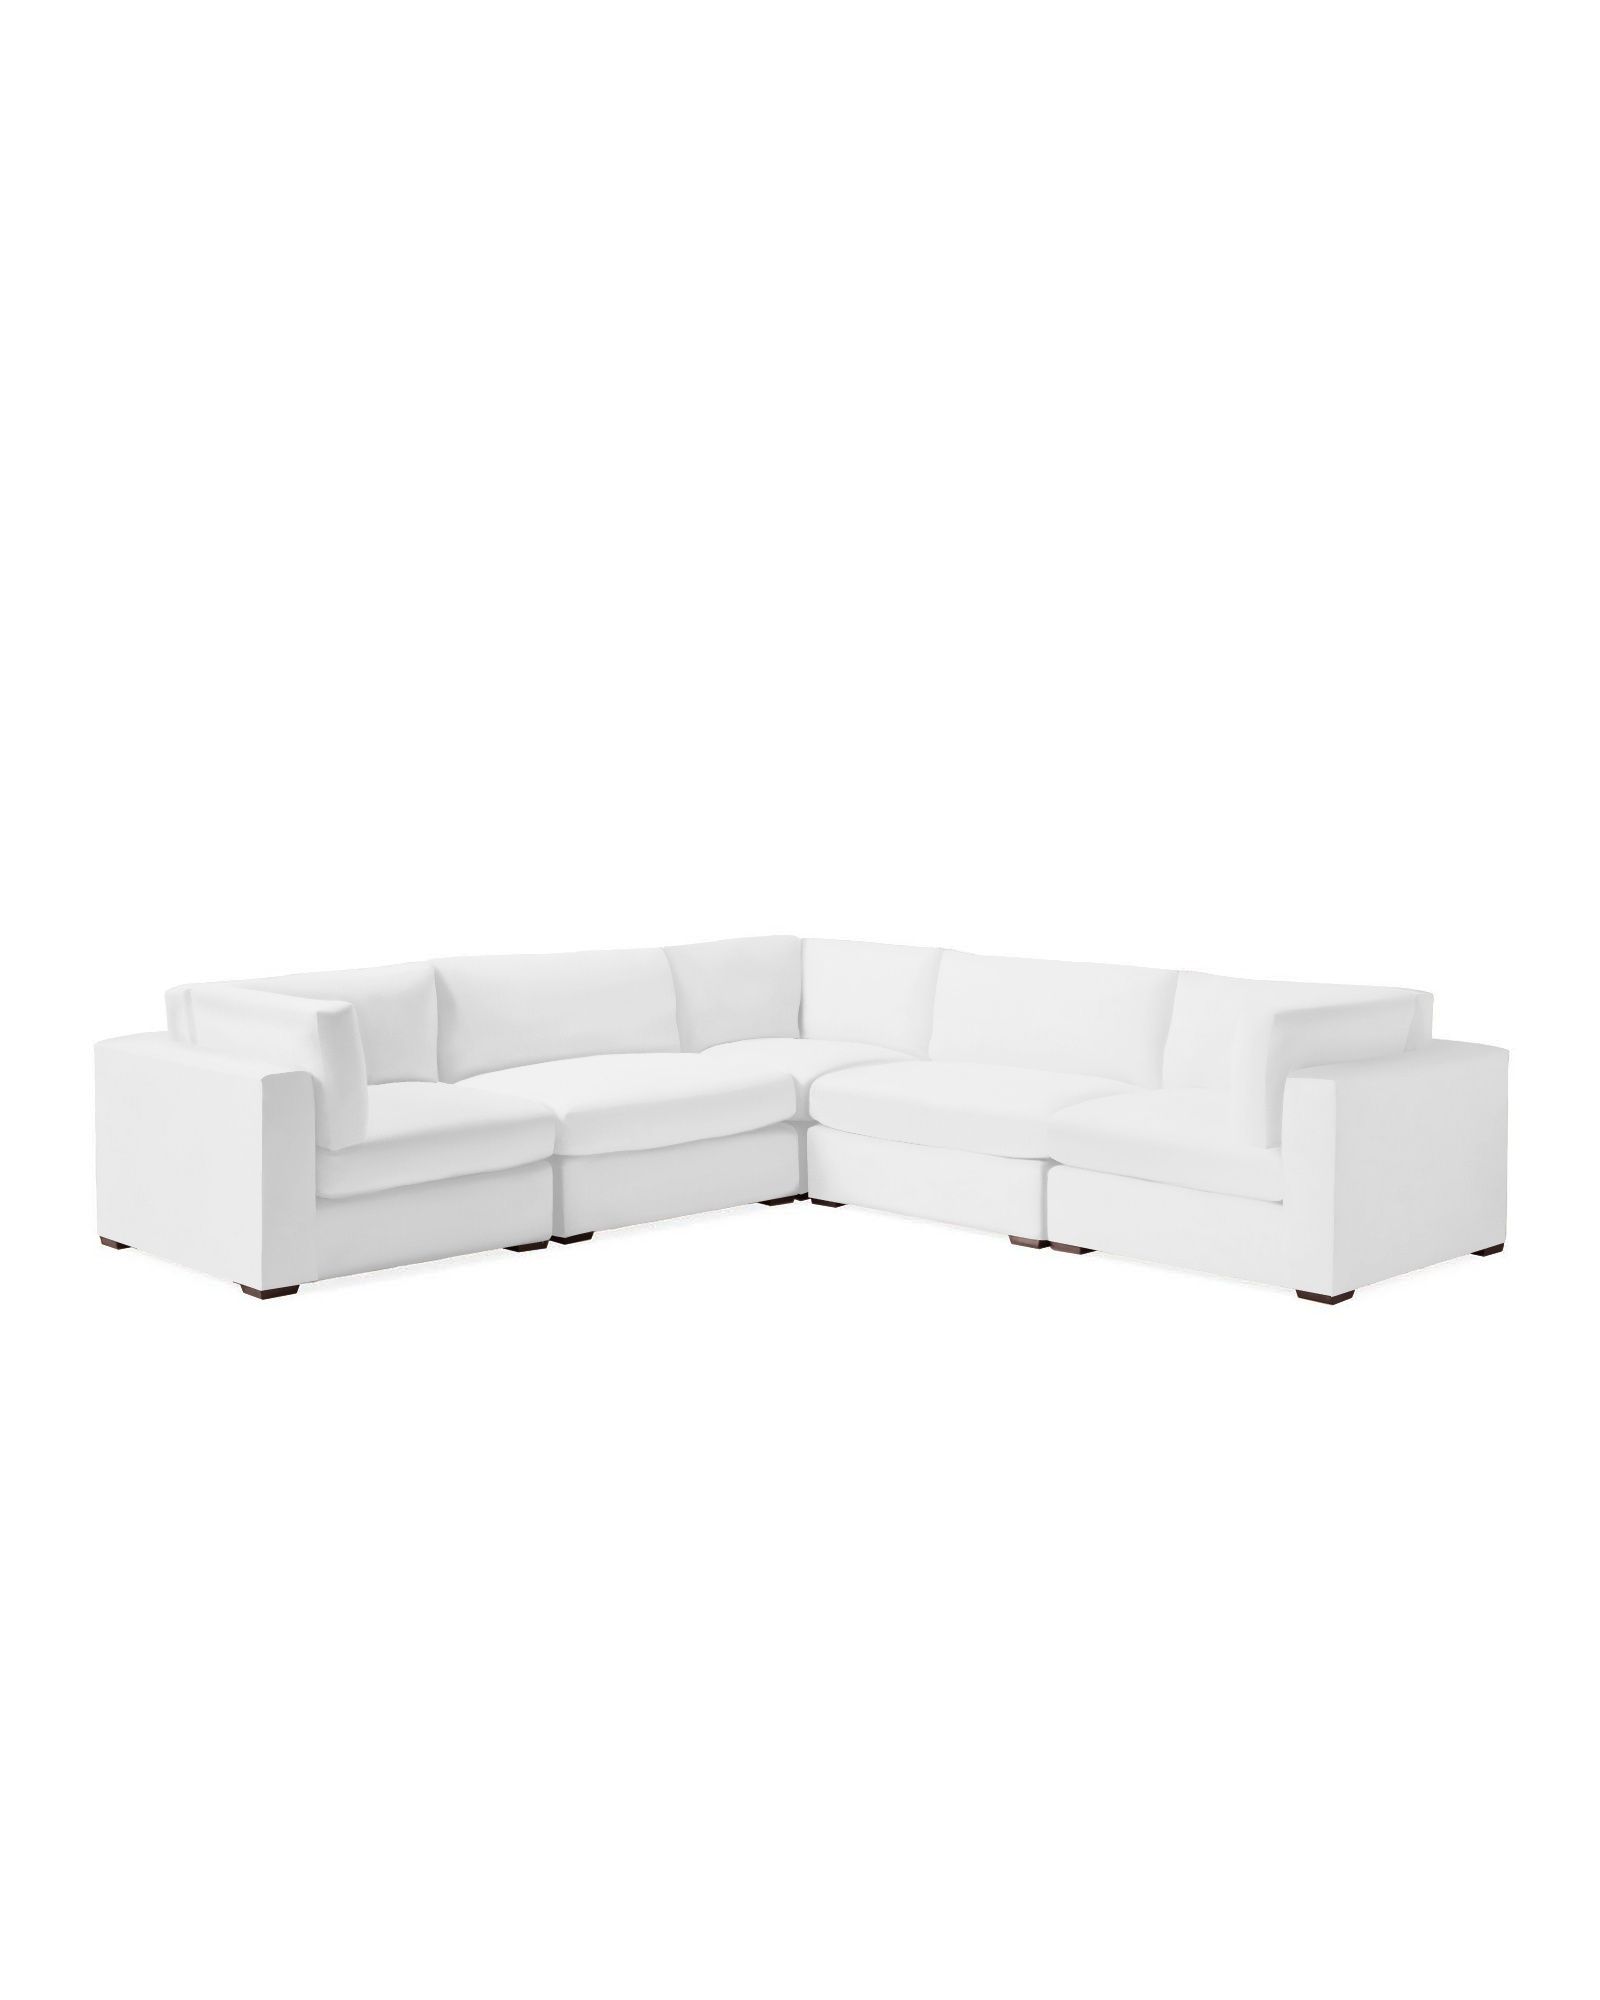 Haven Modular Corner Sectional | Serena and Lily